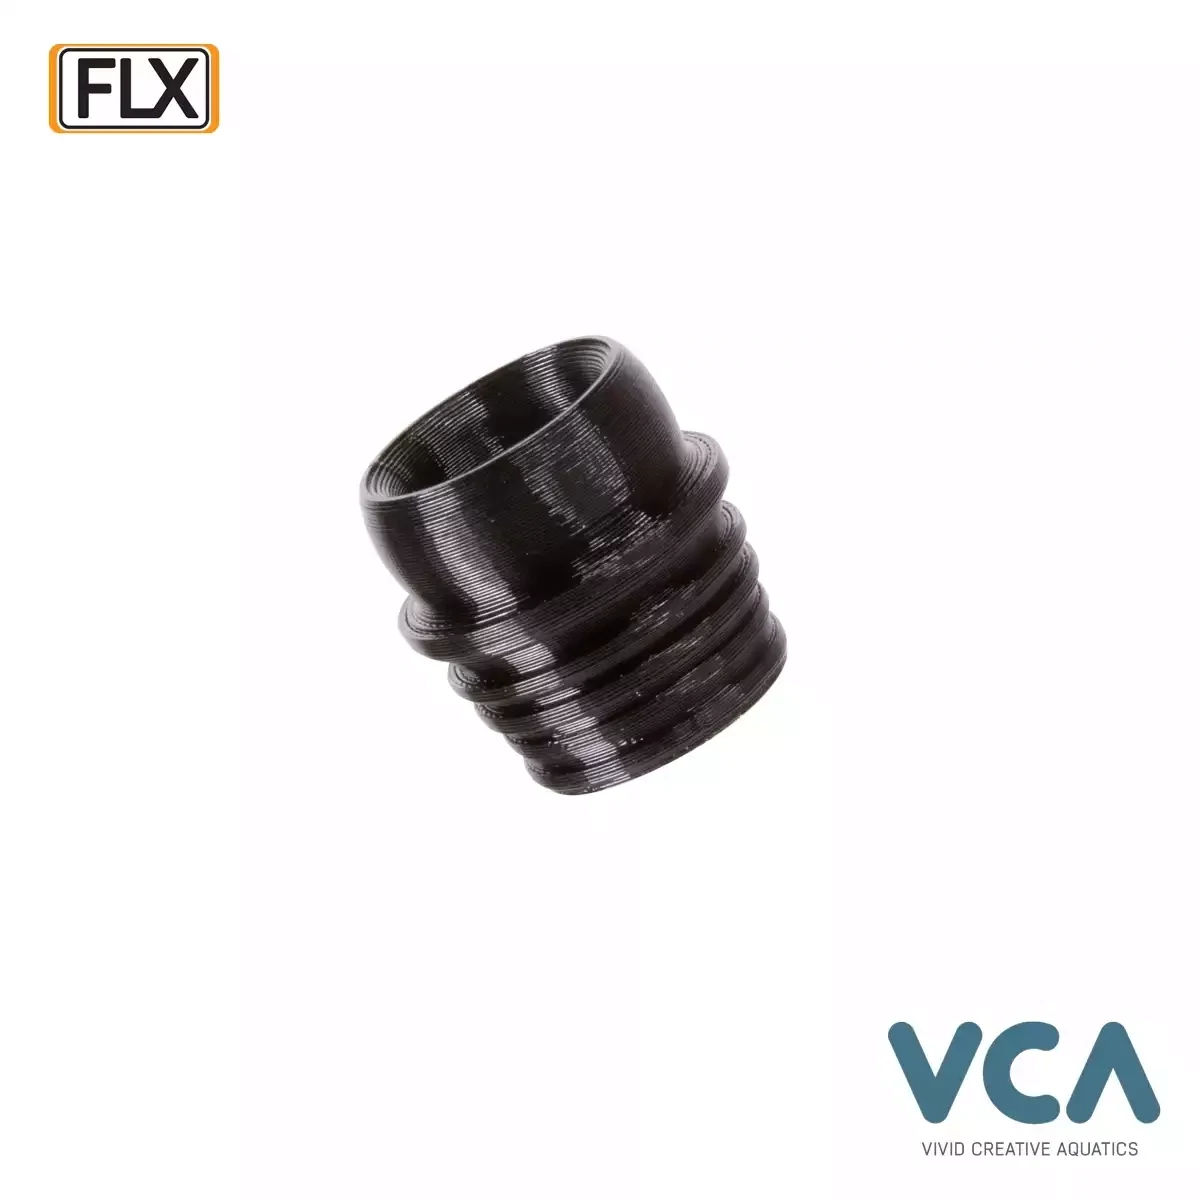 VCA Multiadpter 2025 for 1/2in Loc Line Locline Adapter RFG